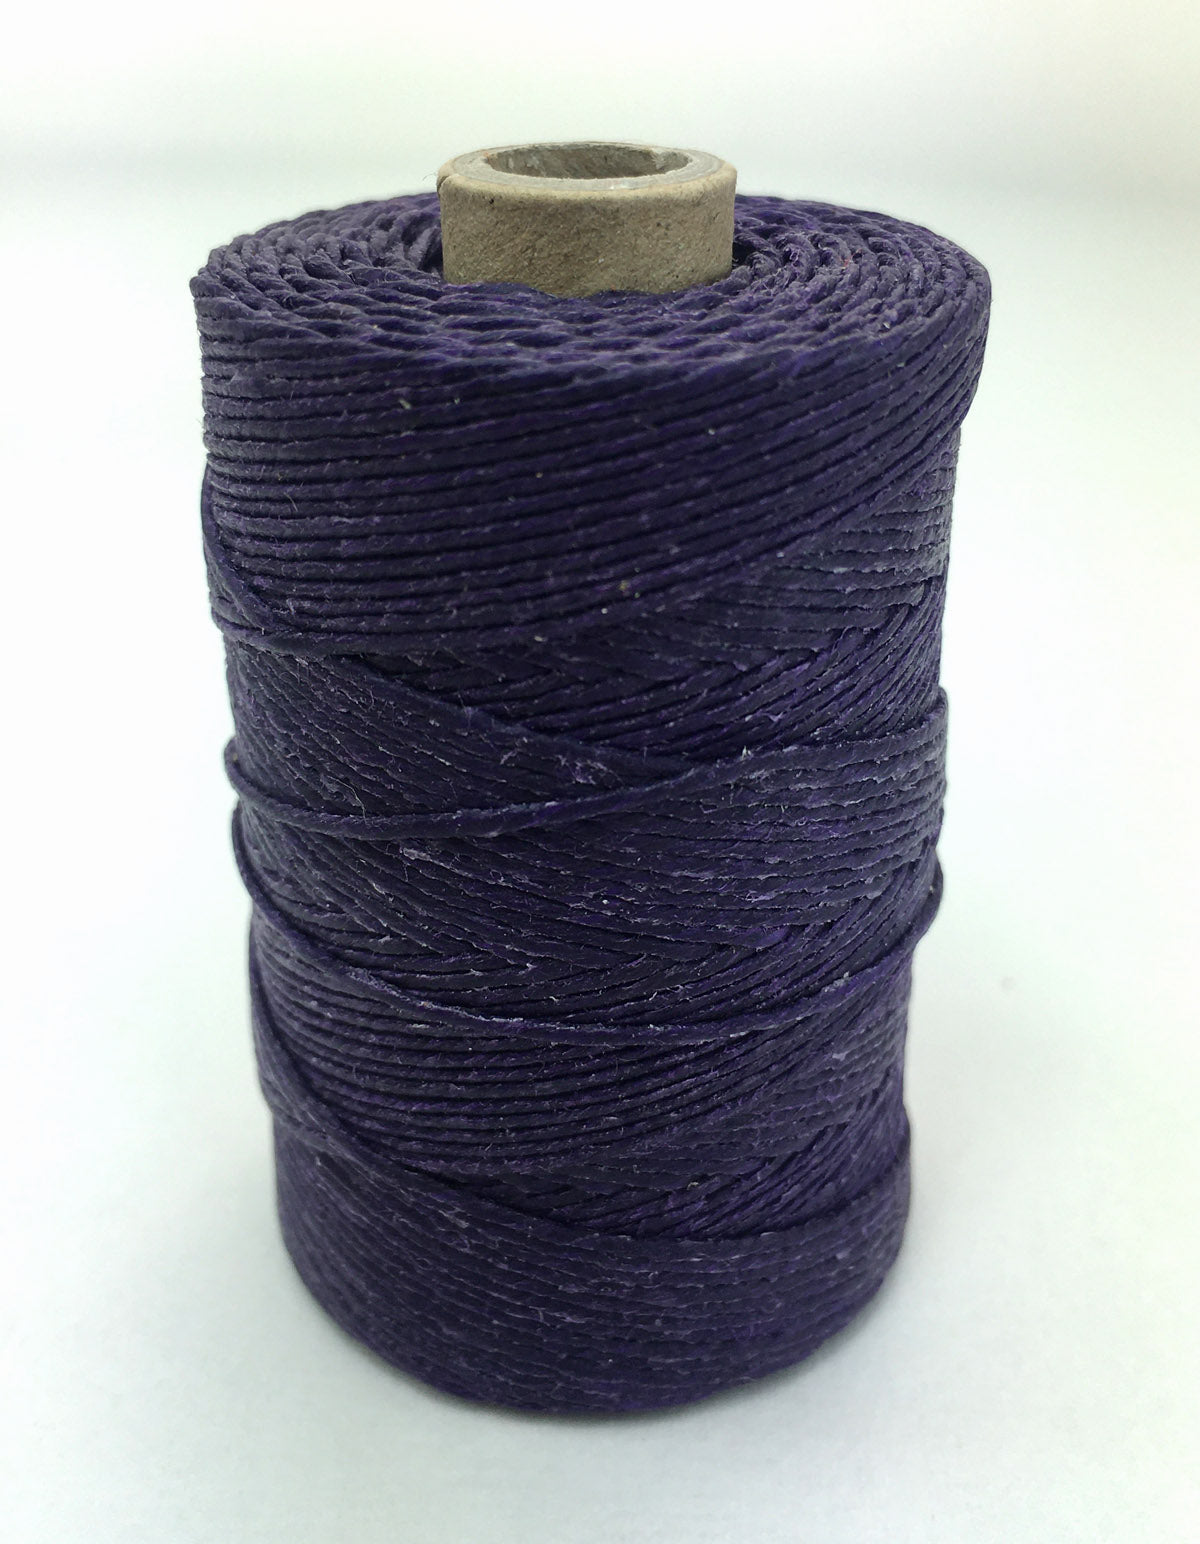 Violet- Per spool 50g- 100% Pure Linen Thread- Waxed- 18/4 No.18 Cord 4- Approx 1mm thick